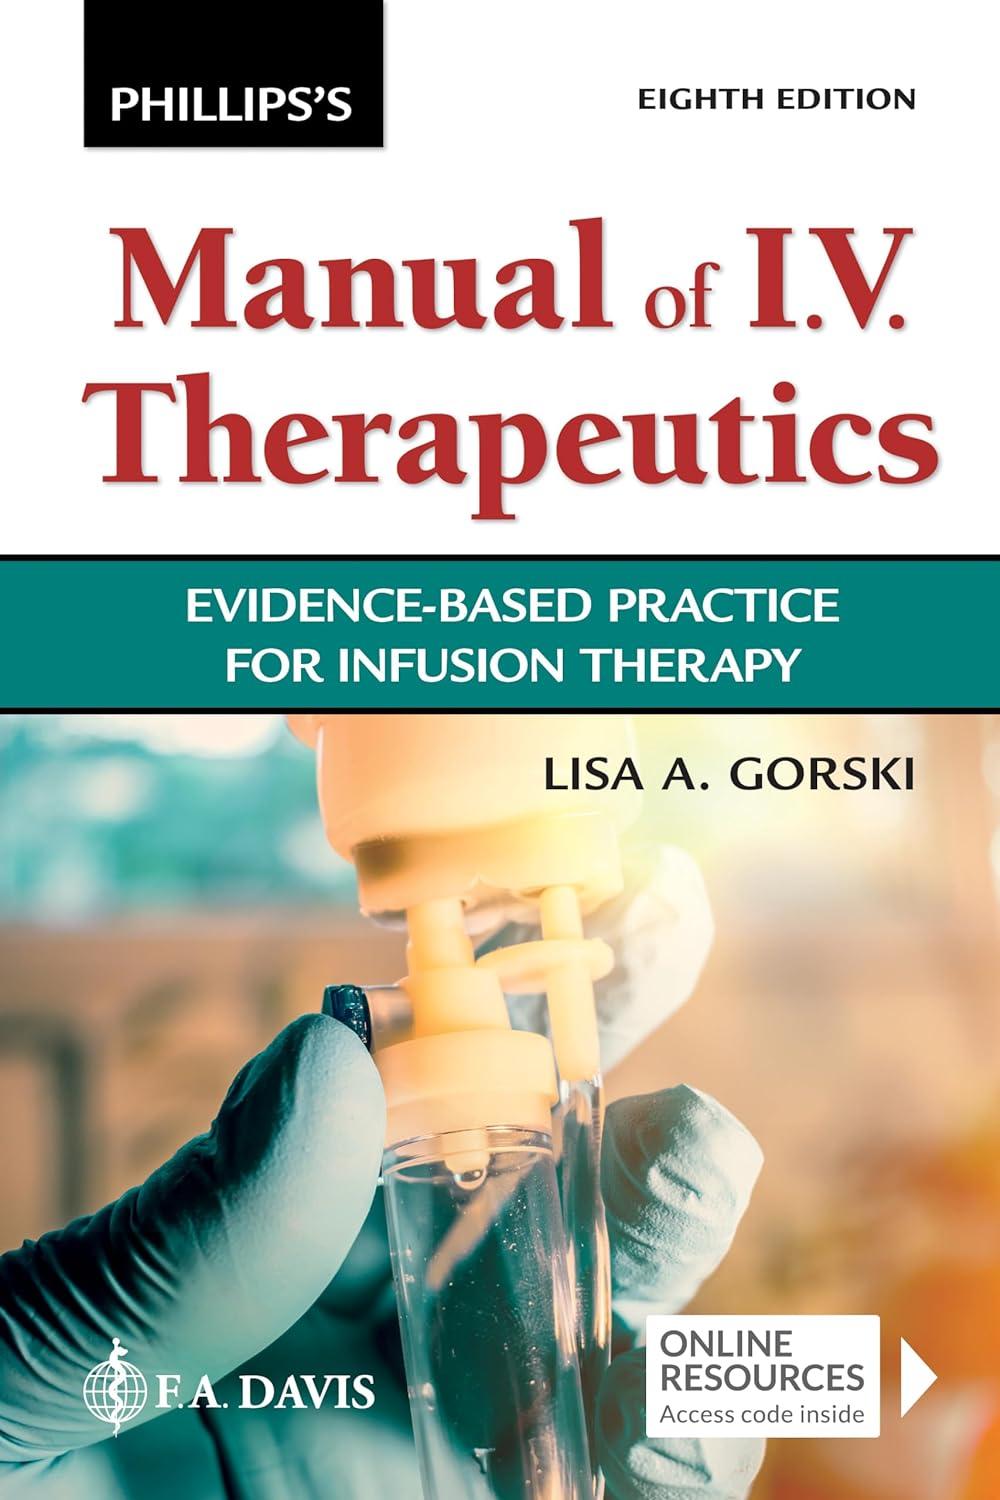 phillips manual of iv therapeutics evidence-based practice for infusion therapy 8th edition lisa gorski